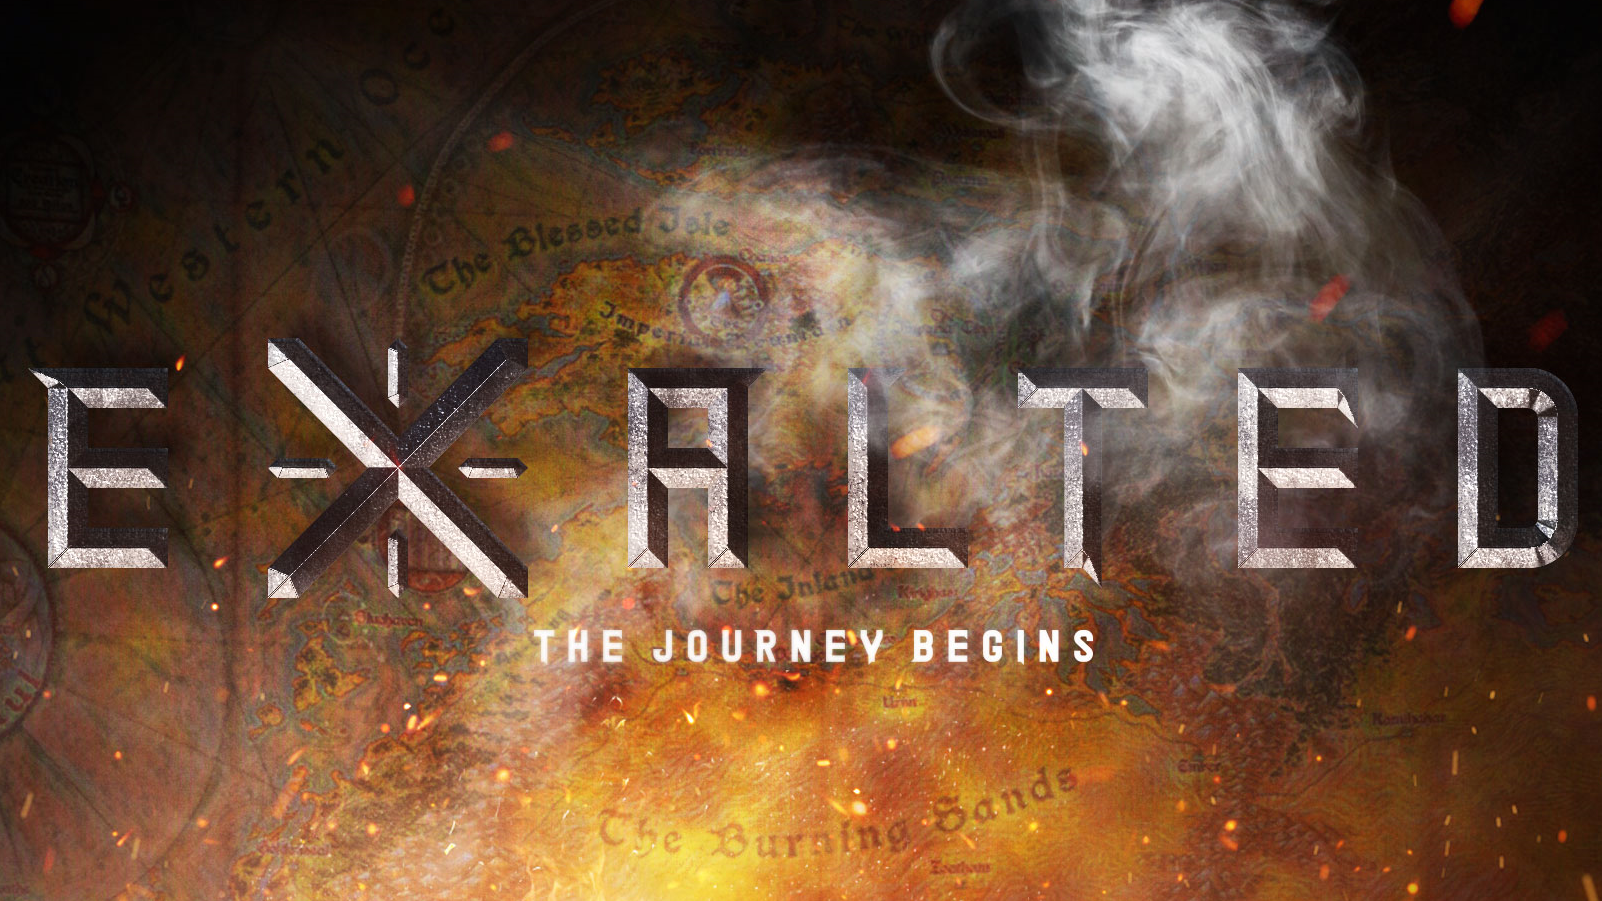 Image for High-powered, high fantasy RPG Exalted will receive a live action television adaptation